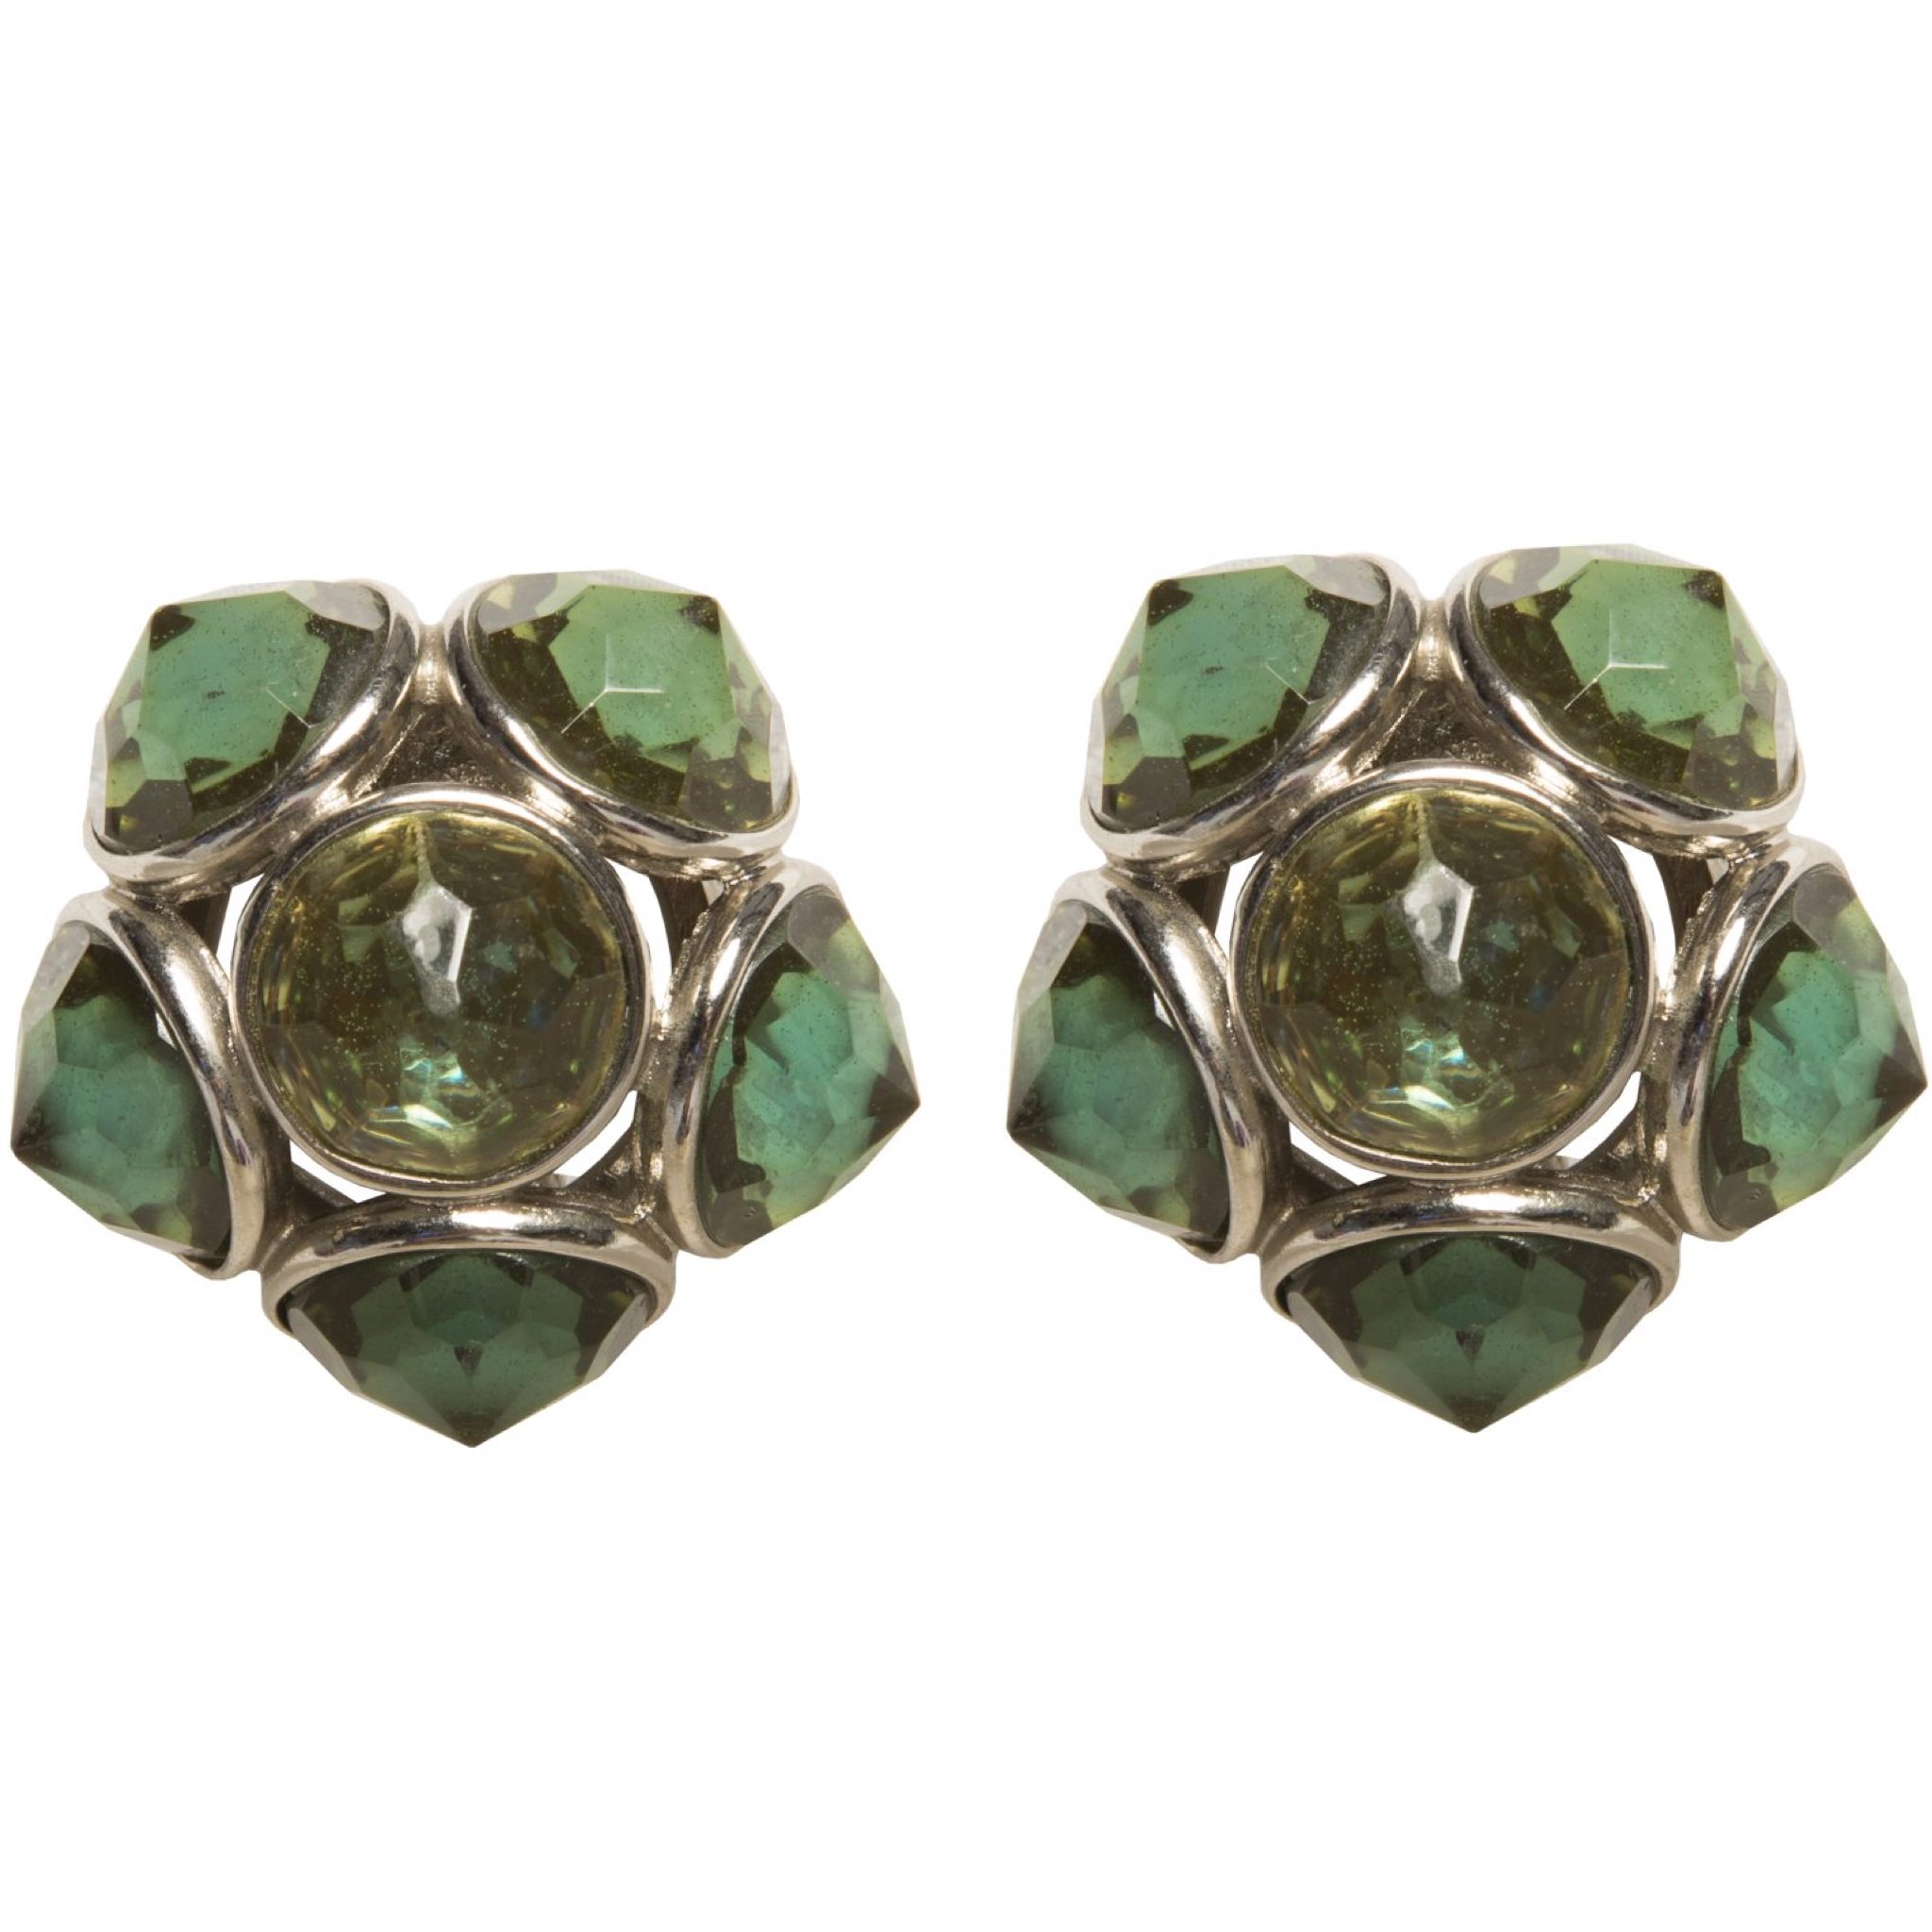 Vintage faced green stones round earrings